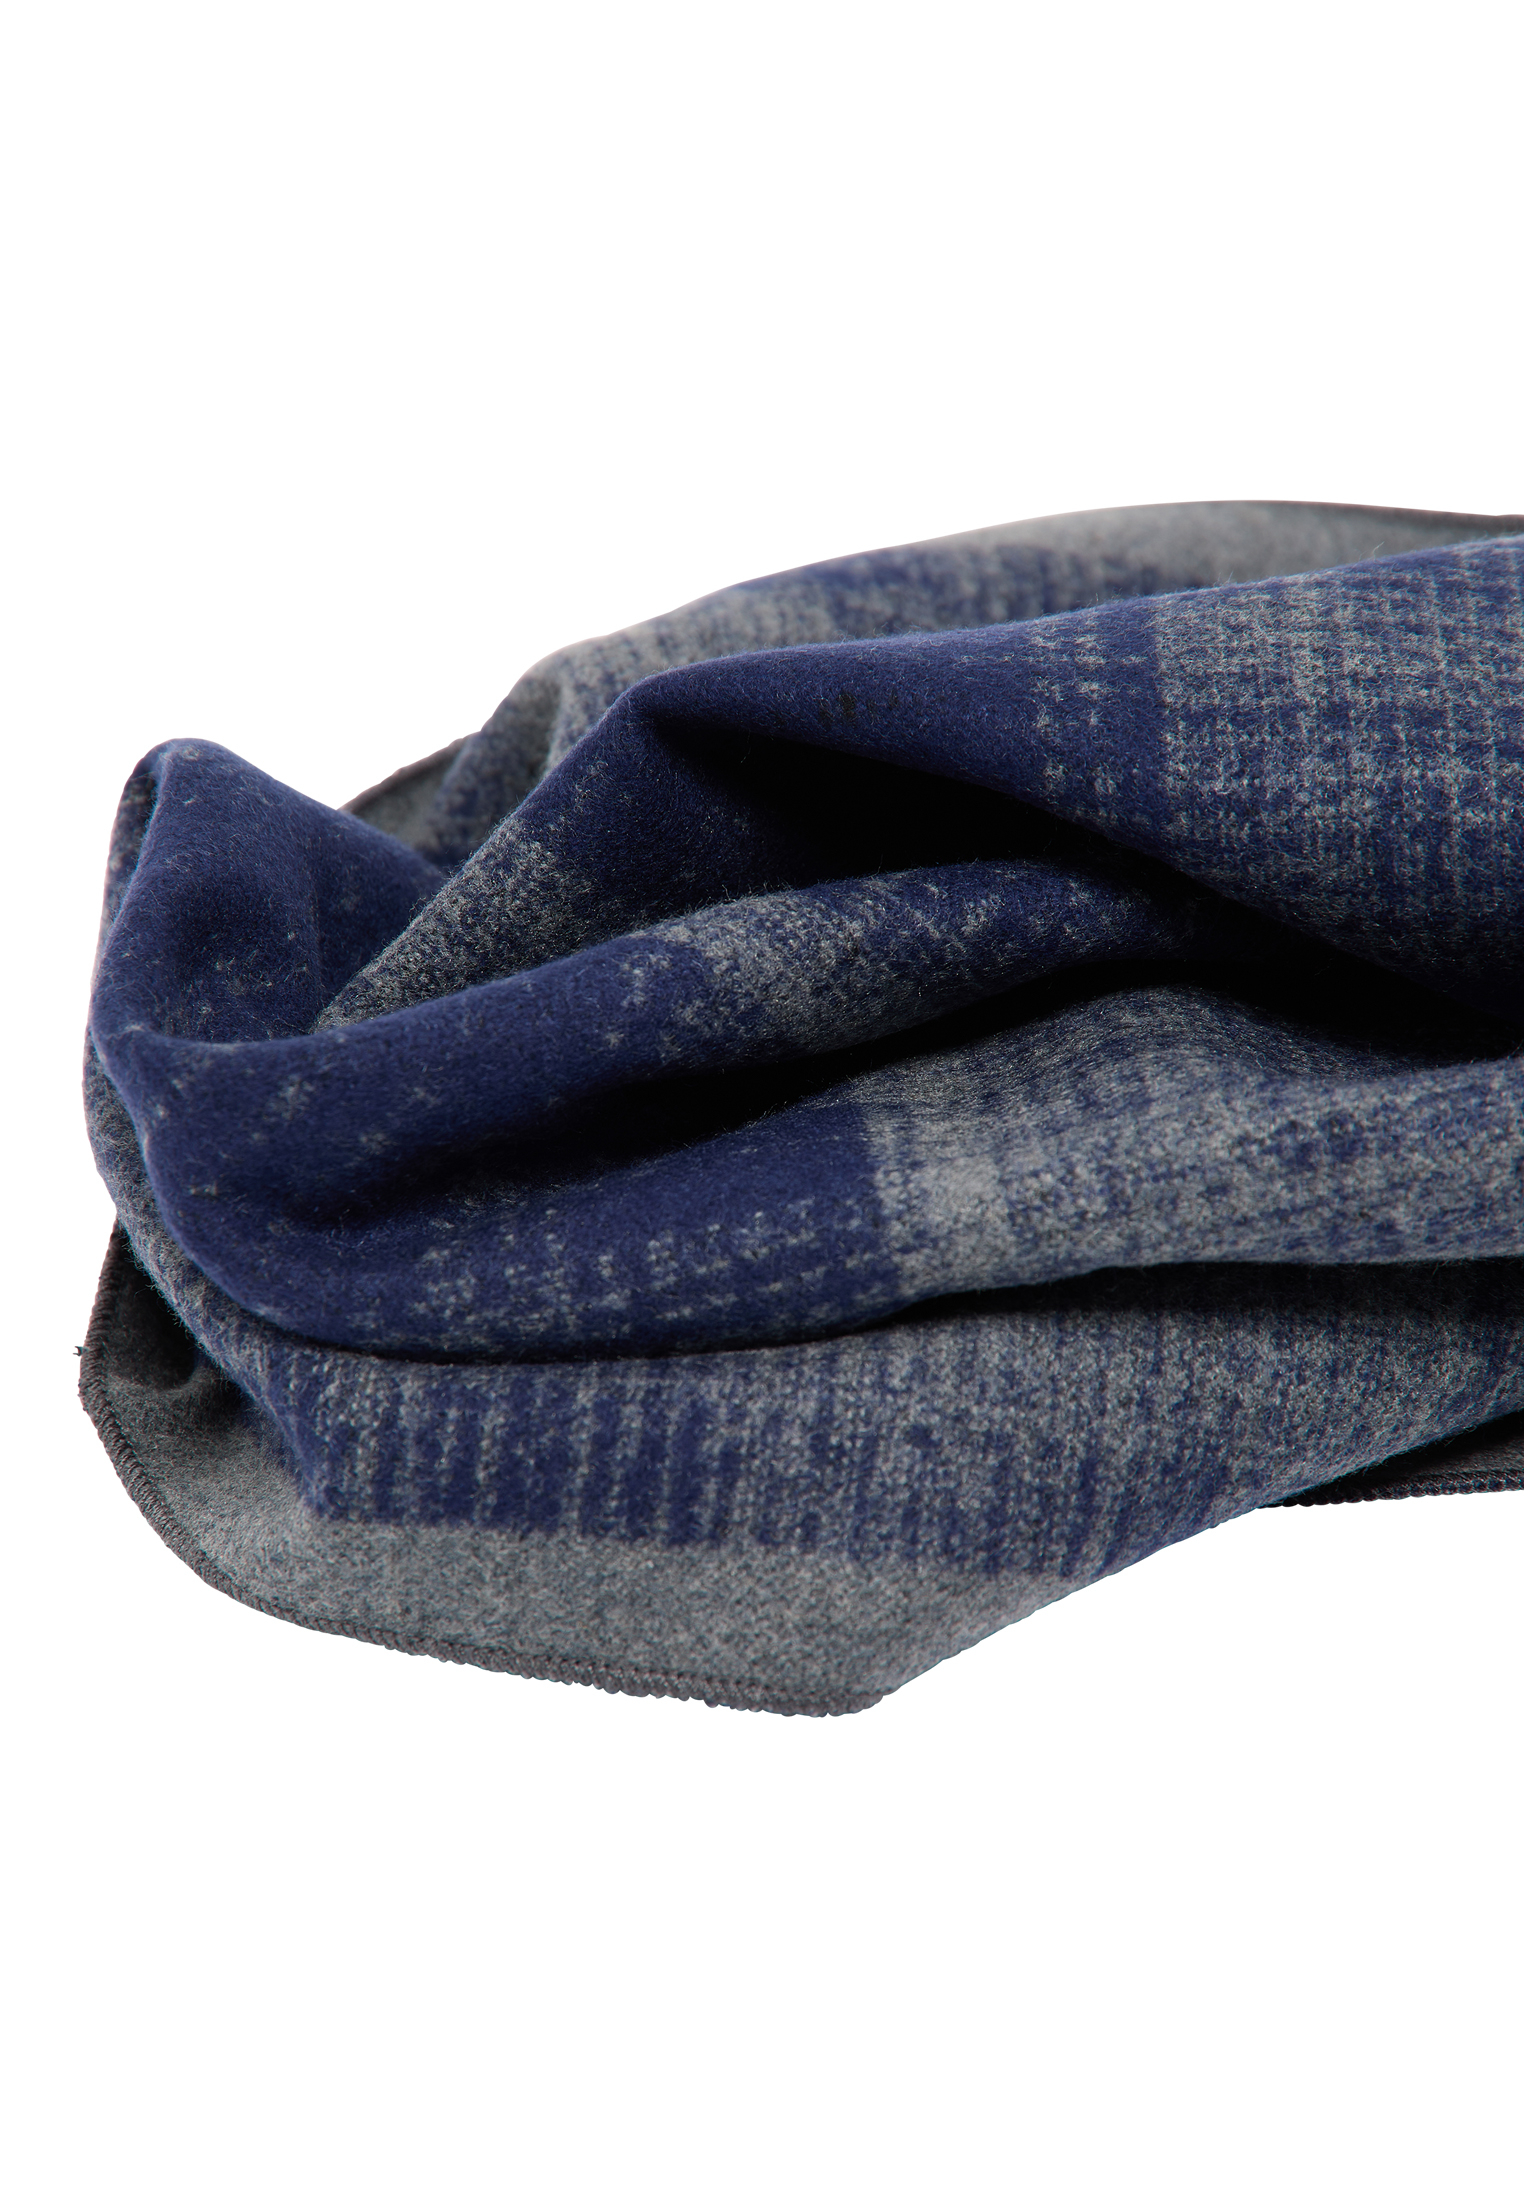 Scarf in OS patterned navy 1AC01913-01-91-OS navy | | 